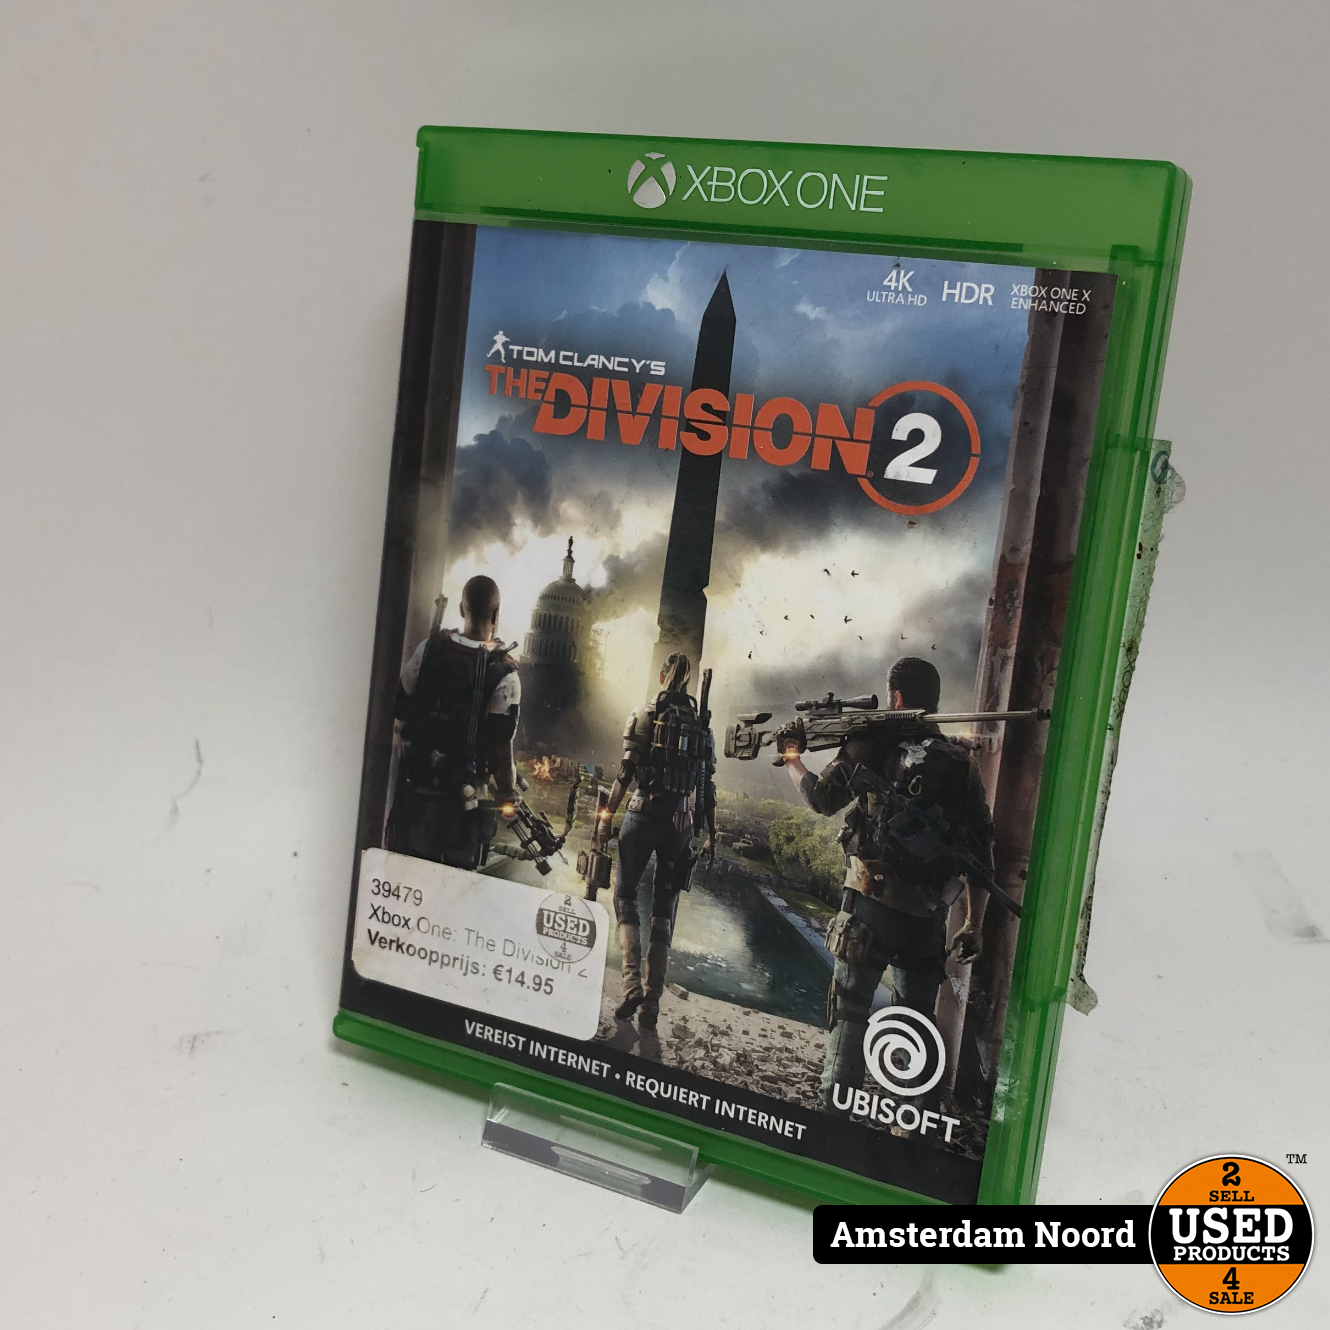 waardigheid Trots plank Xbox One The Division 2 - Used Products Amsterdam Noord